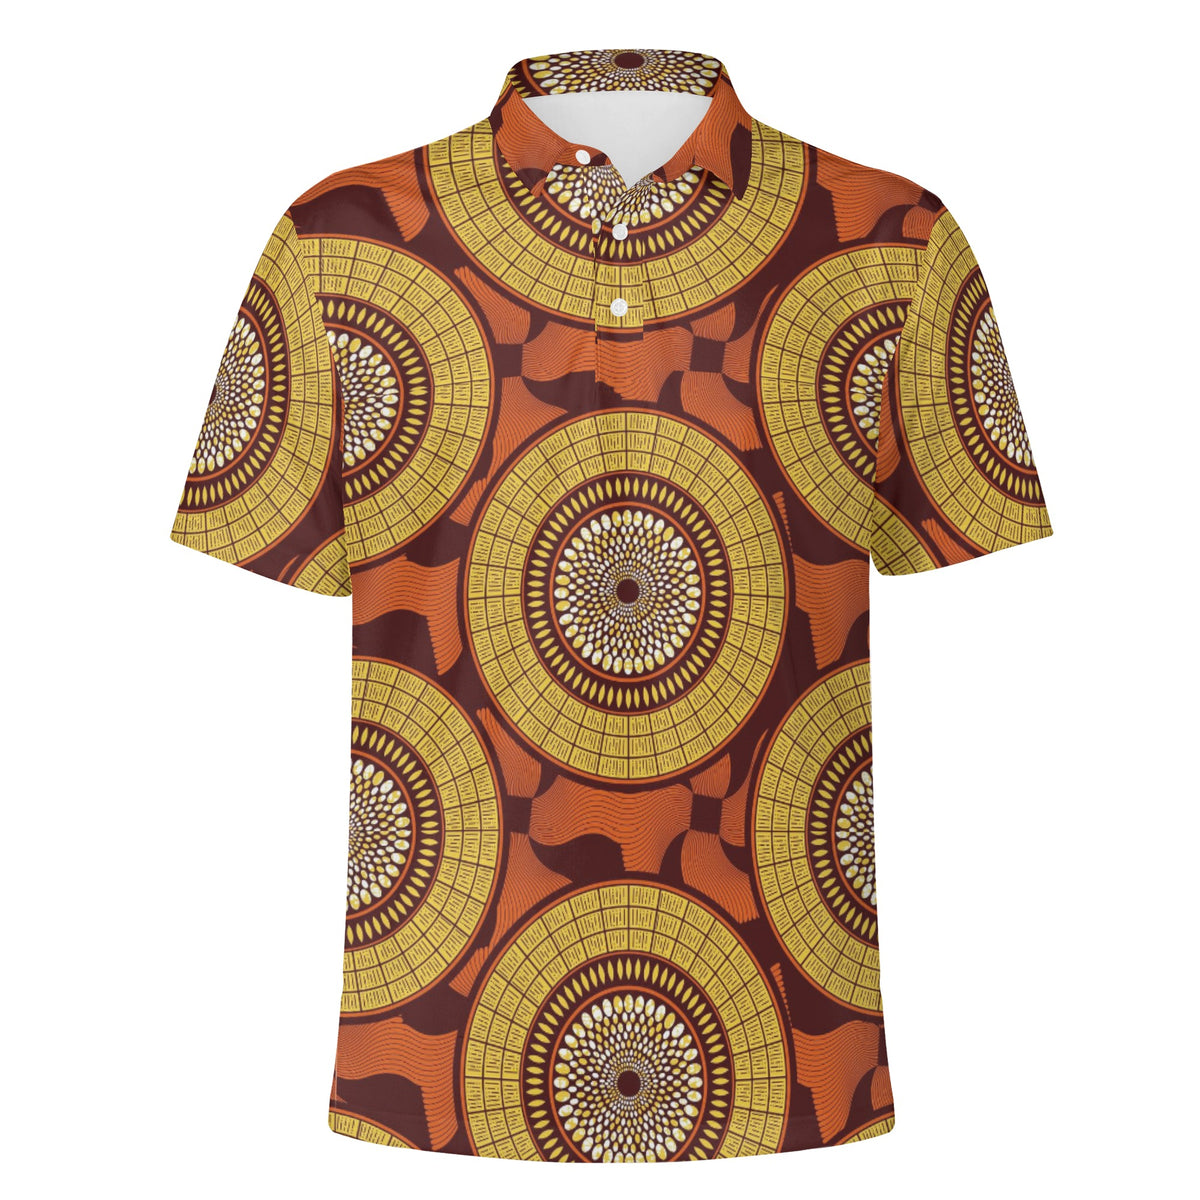 Sienna Polo Shirt with African Ankara prints in vibrant colors Sumbu_African_Prints_and_Designs